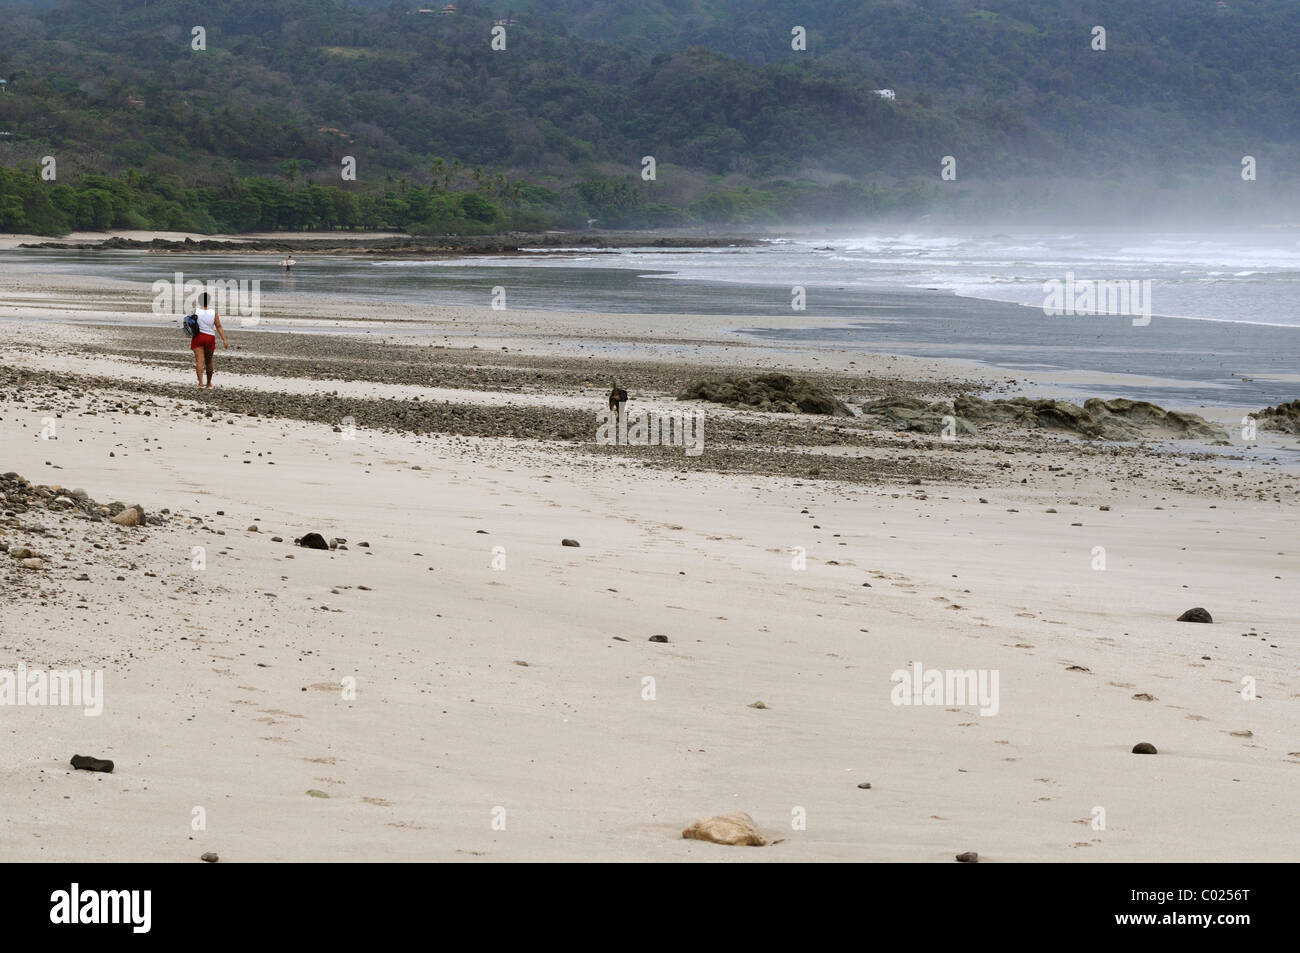 Beach by The Pacific, Mal Pais Costa Rica Stock Photo